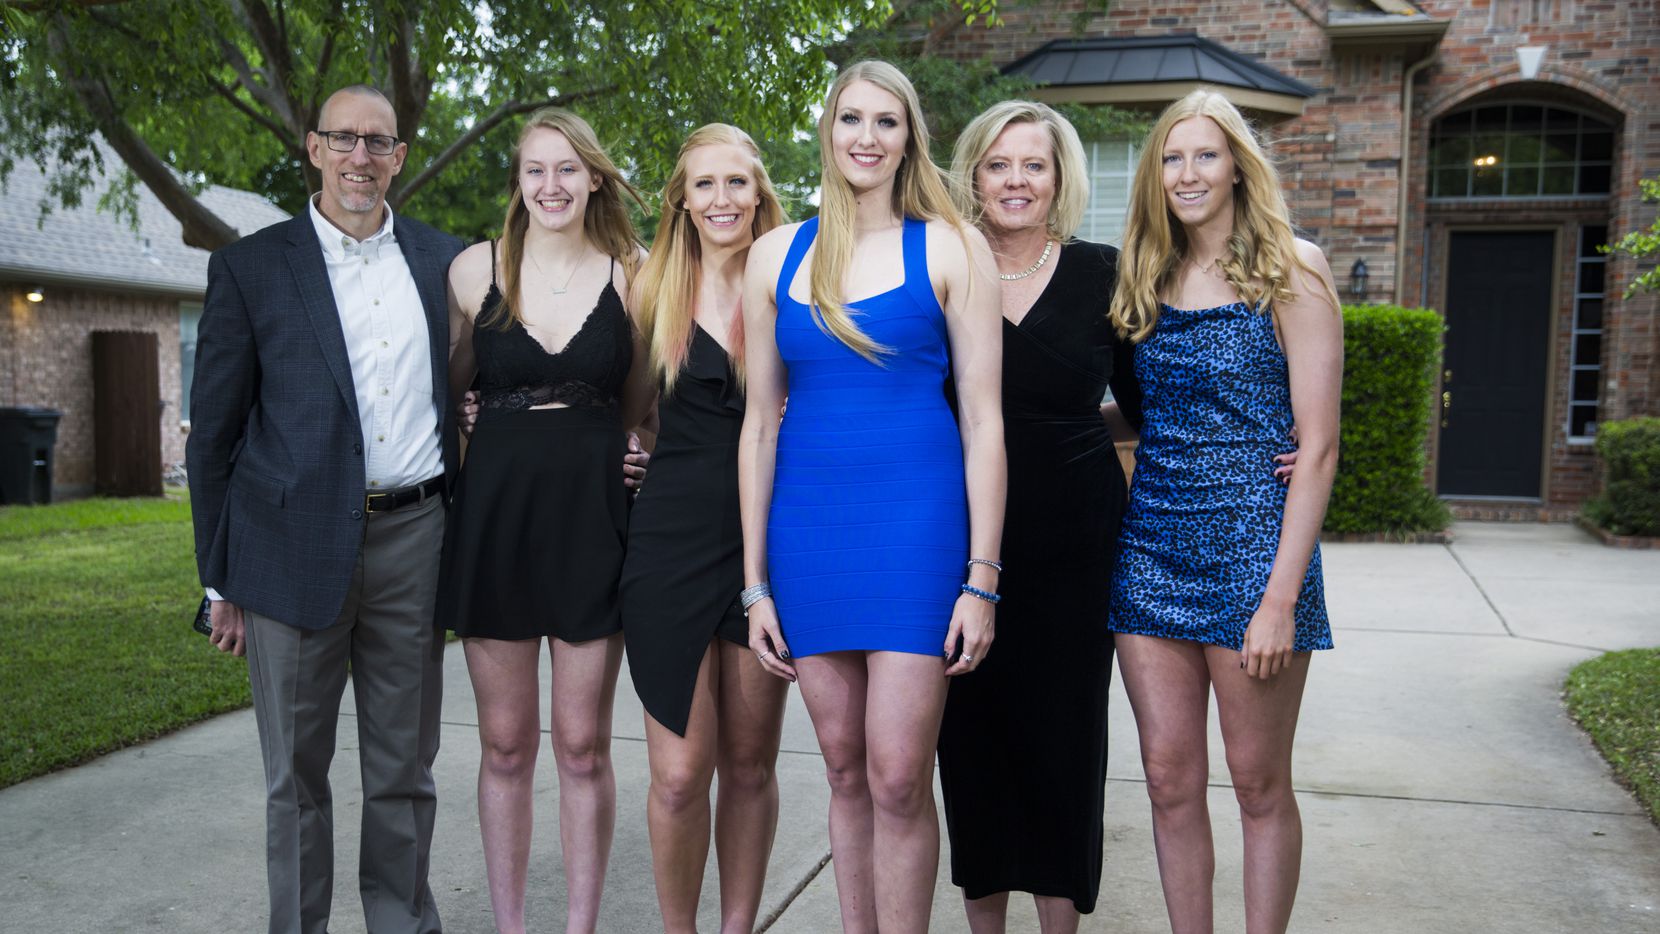 Basketball player Lauren Cox (center) poses for a photo with her family outside their home...